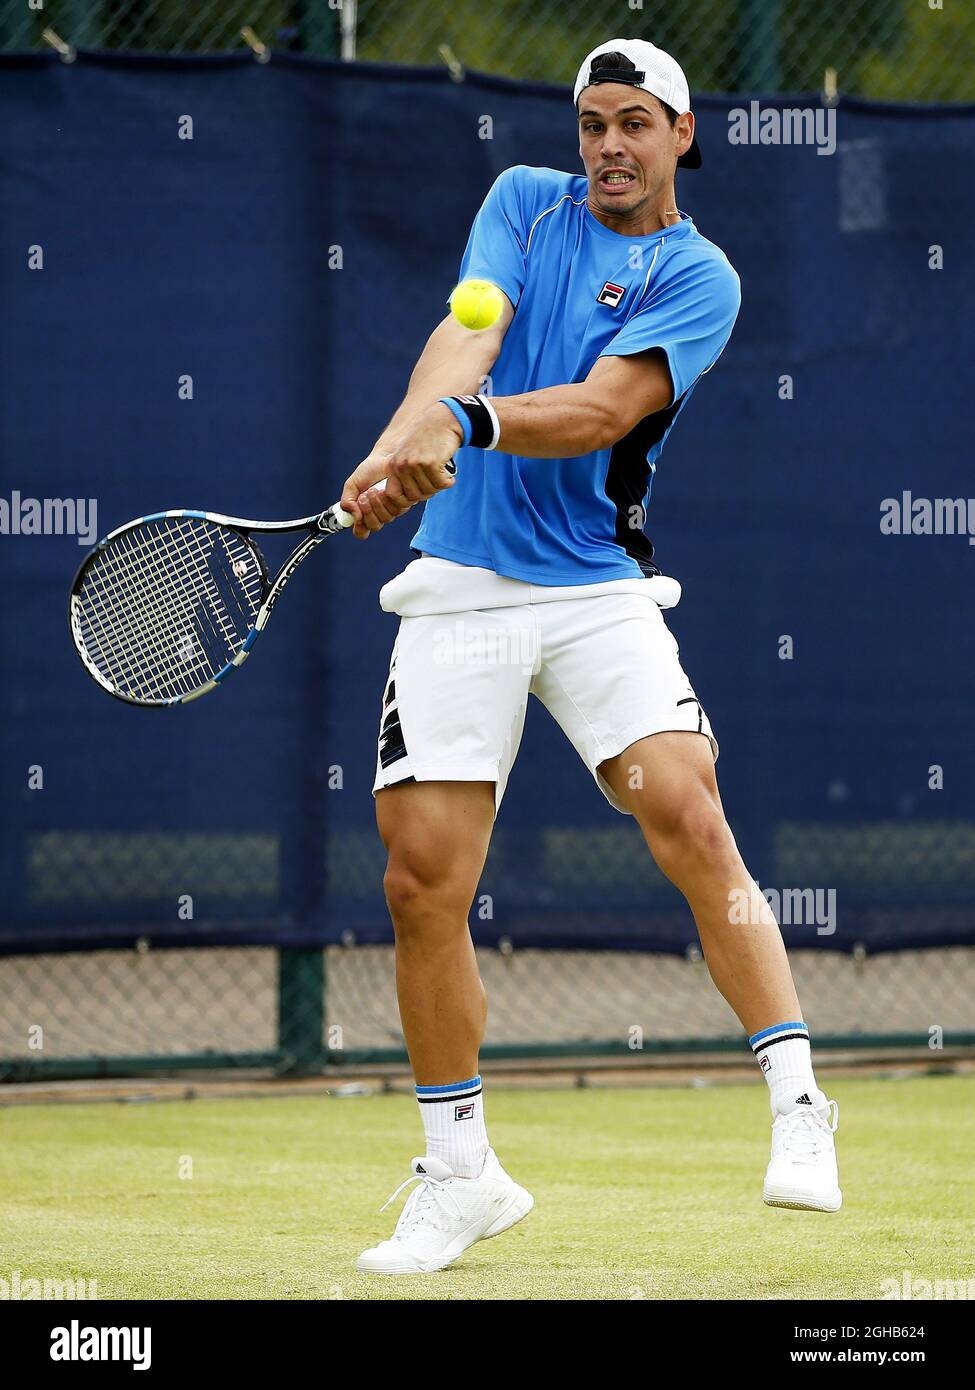 Alex Bolt of Australia during the AEGON Nottingham Open match at the Nottingham Tennis Centre. Picture date: June 12th, 2017. Picture credit should read: Matt McNulty/Sportimage via PA Images Stock Photo